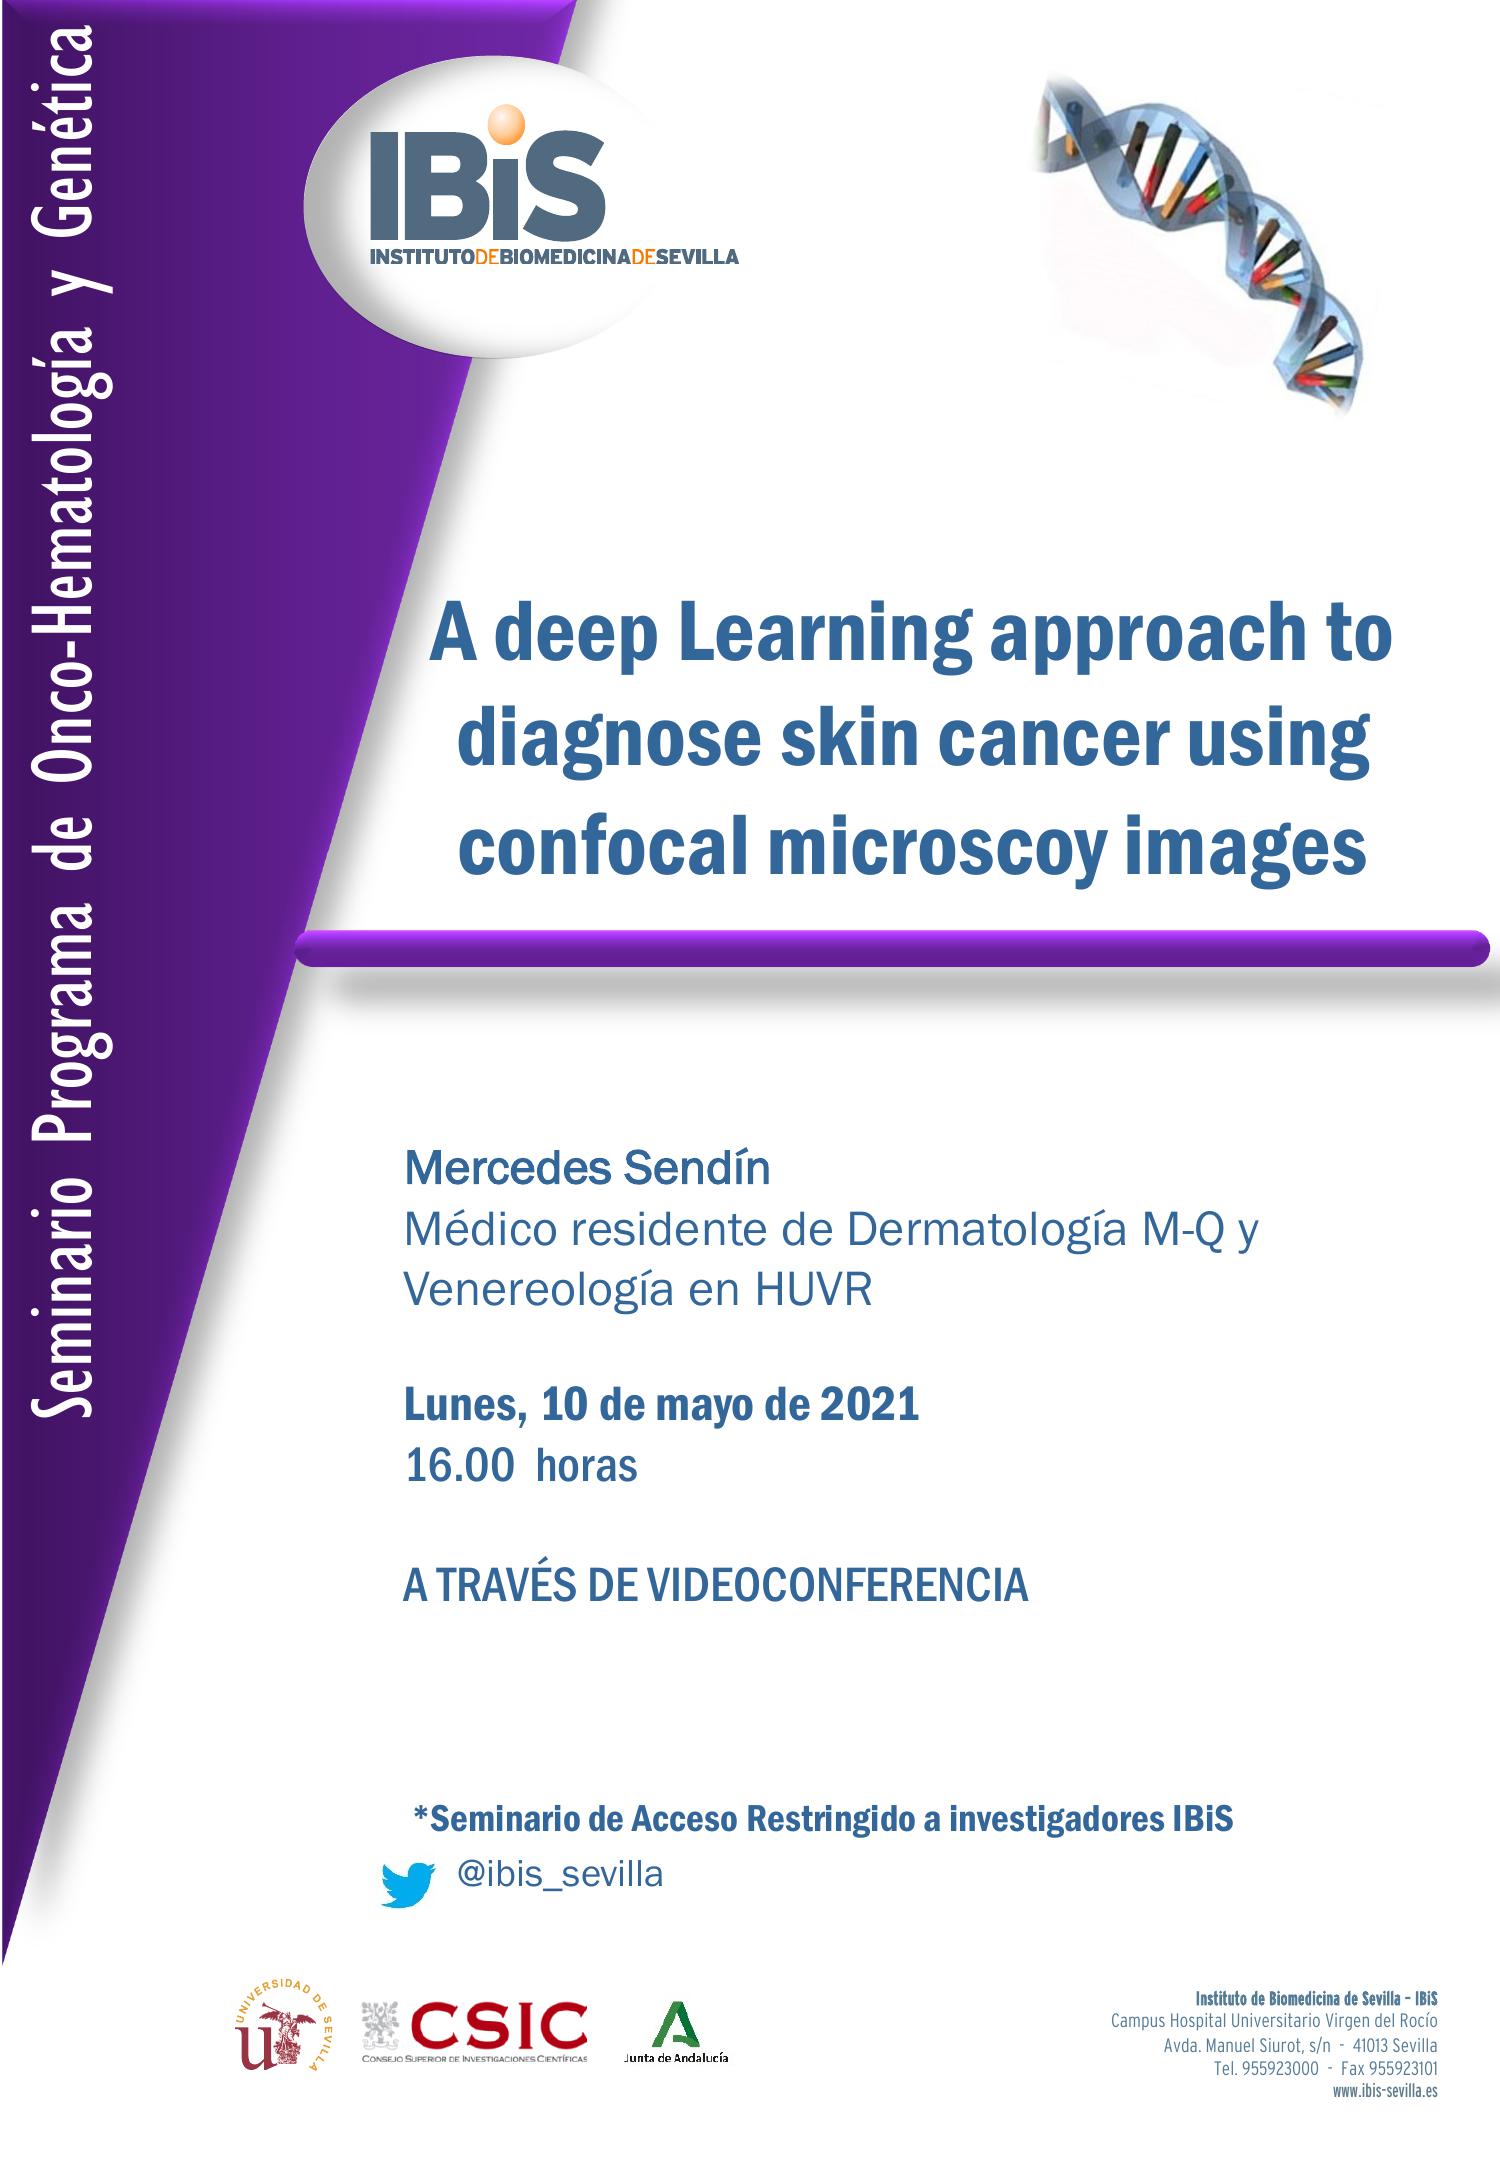 Poster: A Deep Learning approach to diagnose skin cancer using confocal microscopy images